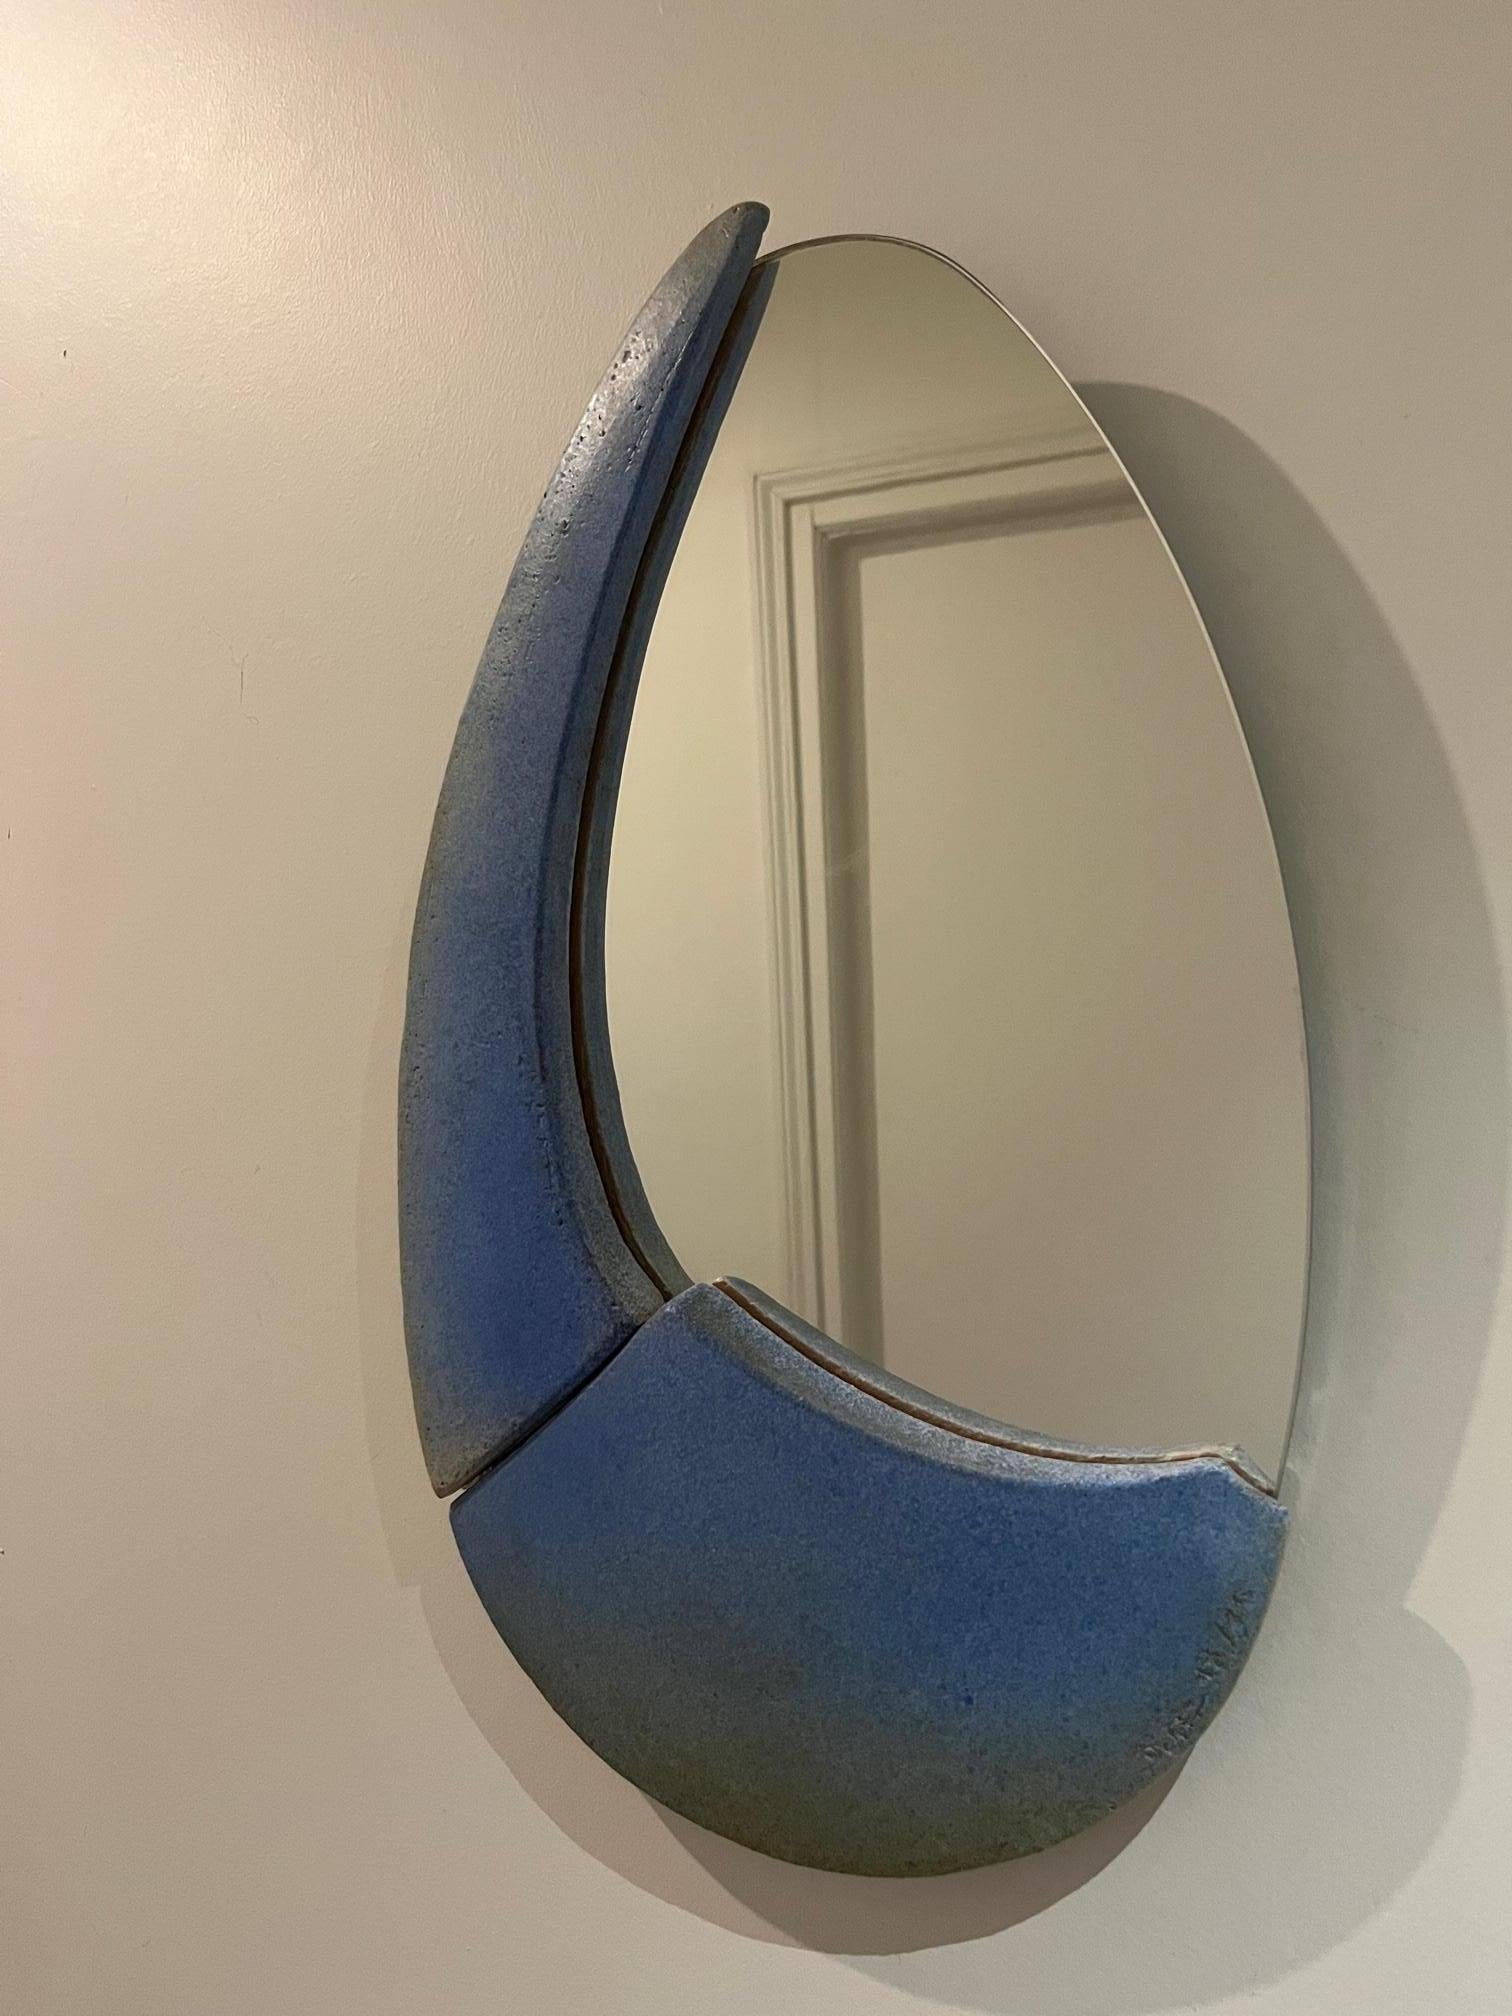 Beautiful ceramic mirror in good vintage condition from the 1970s 
Designed by Bernard Defer, french ceramist based in the East of France, his work is characterised by its sobriety.